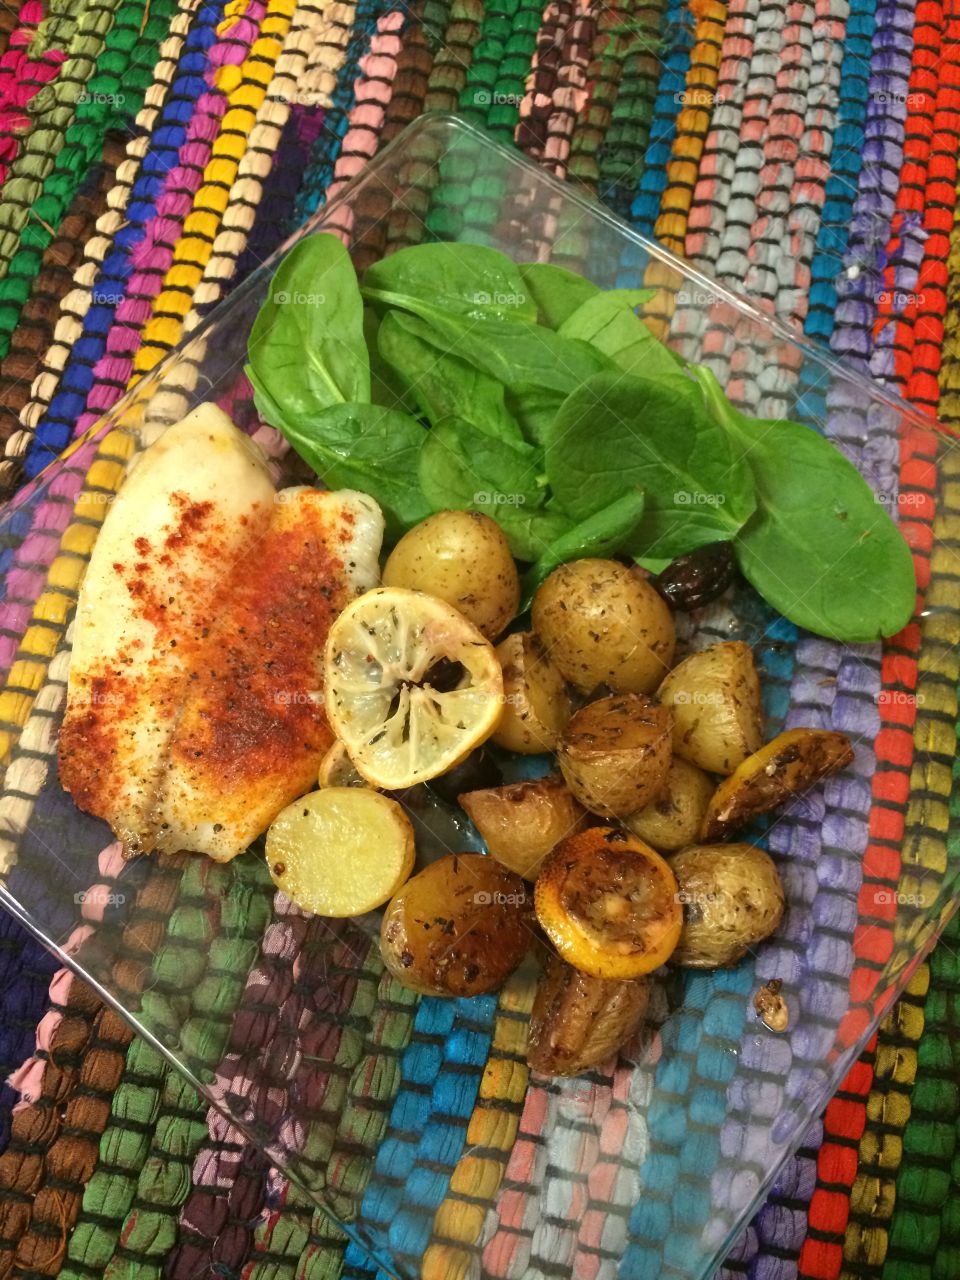 Fish Dinner. Tilapia fish, potatoes, spinach, and olives for a wholesome dinner